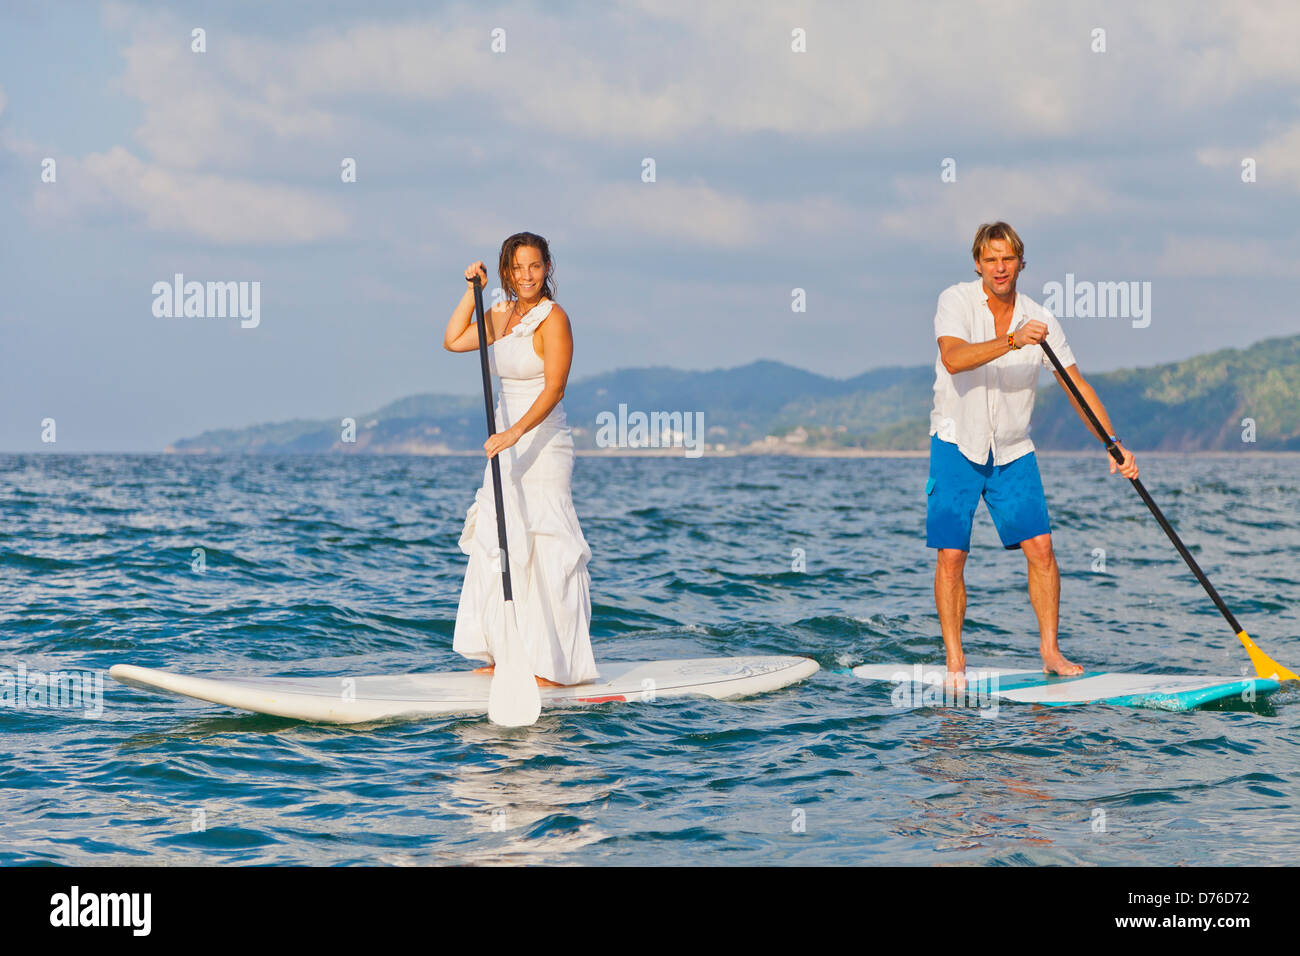 Dressed up man and woman riding paddle boards Stock Photo